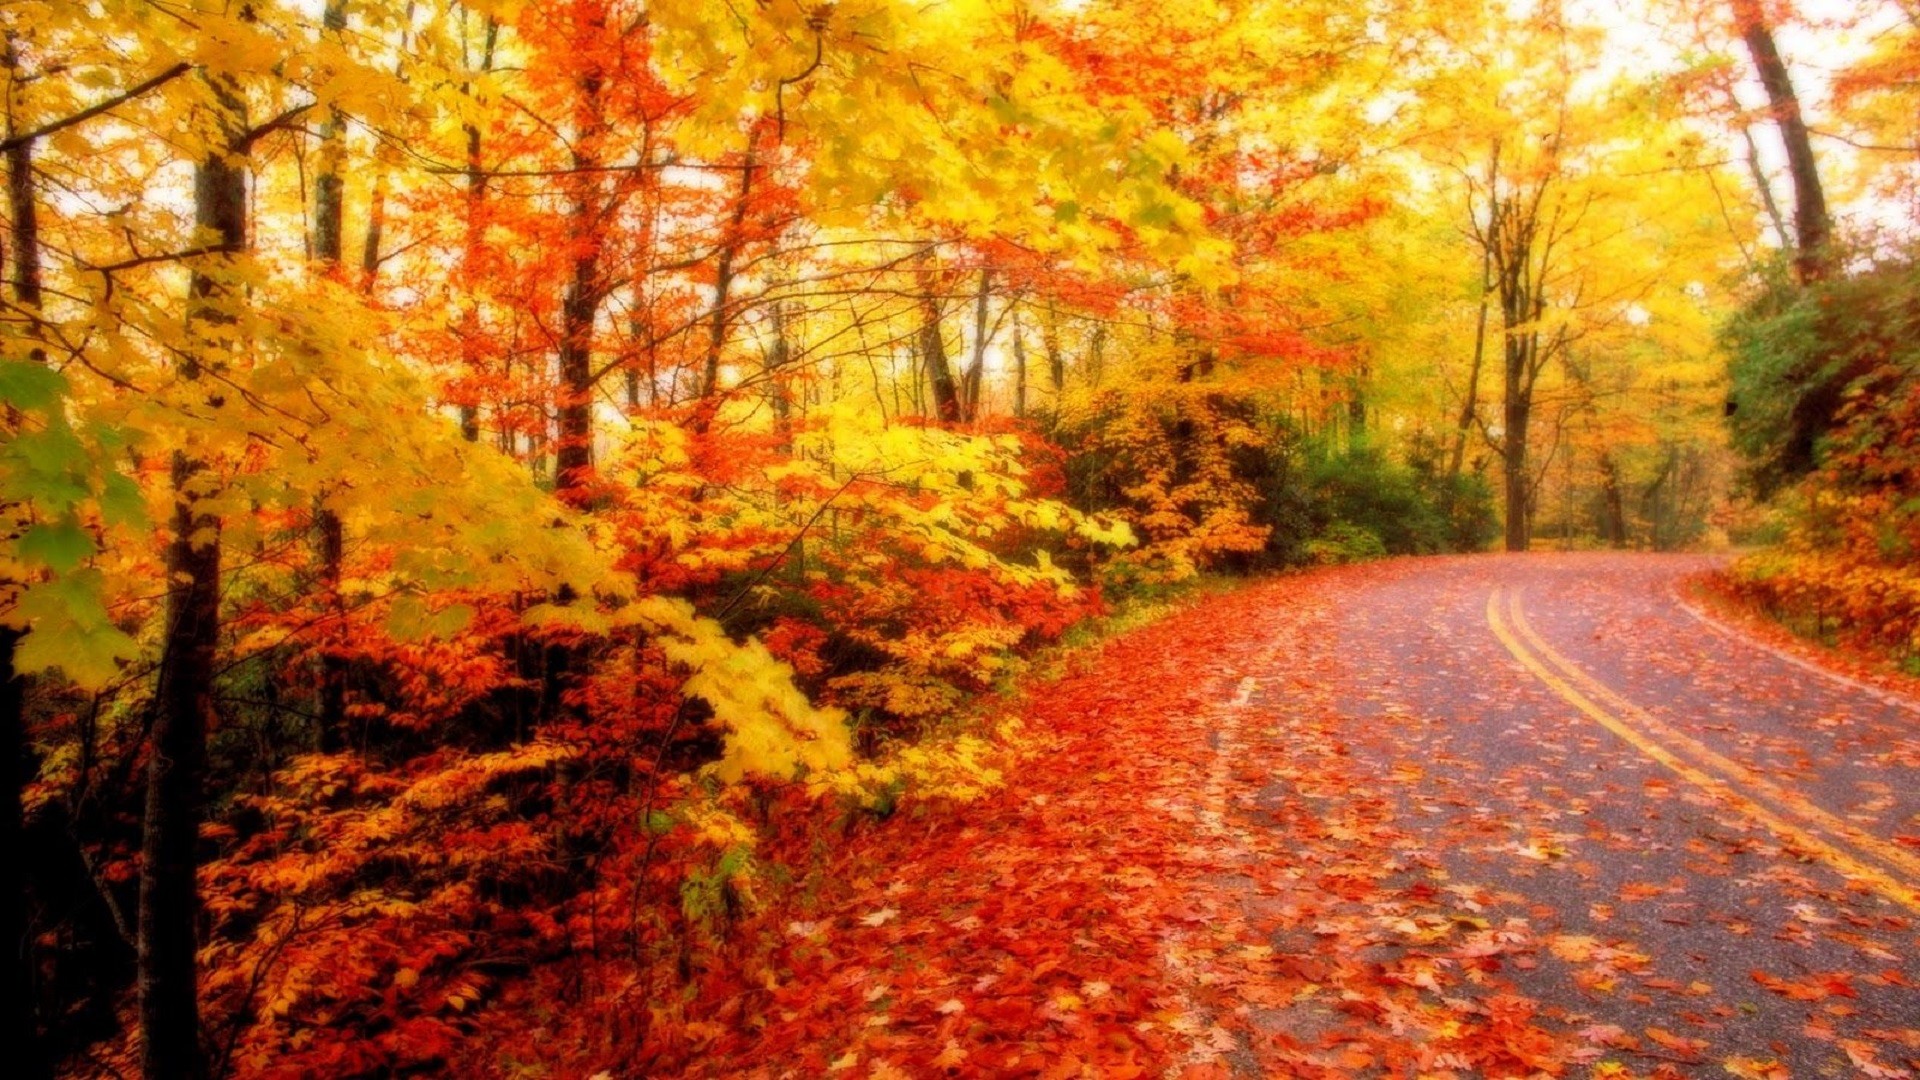 1920x1080 Autumn & Fall Season HD Wallpapers For Download